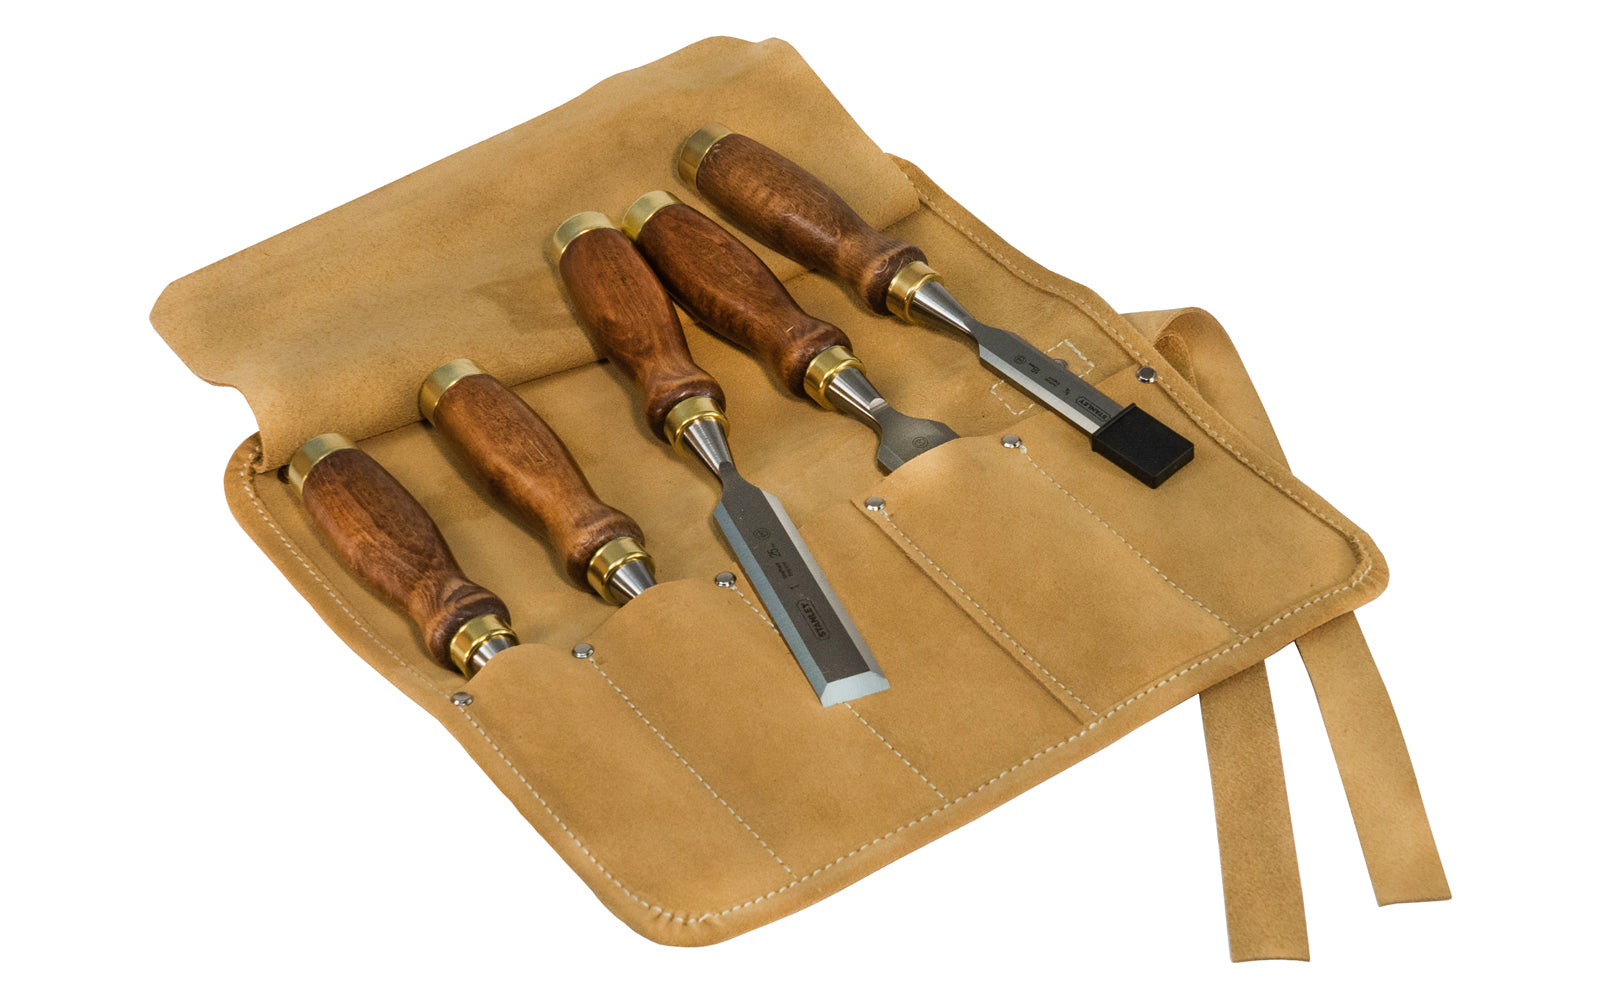 Bench Knife - Wooden Handle (ToolUSA: TJ01-09673)